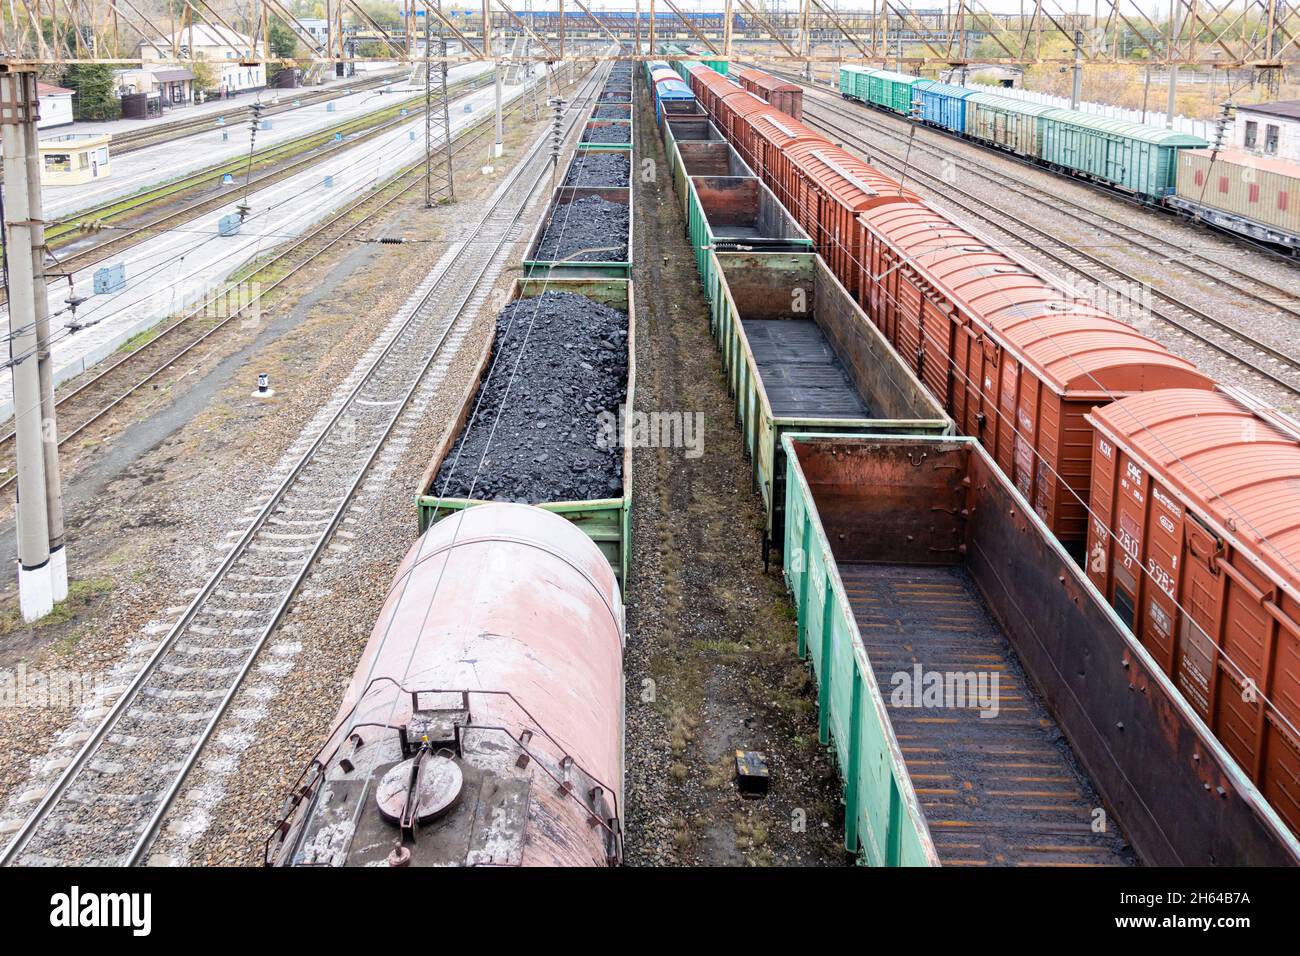 Freight train open cars loaded with coal cargo, stationary in a depot on rails. Karaganda, Kazakhstan, Central Asia Stock Photo